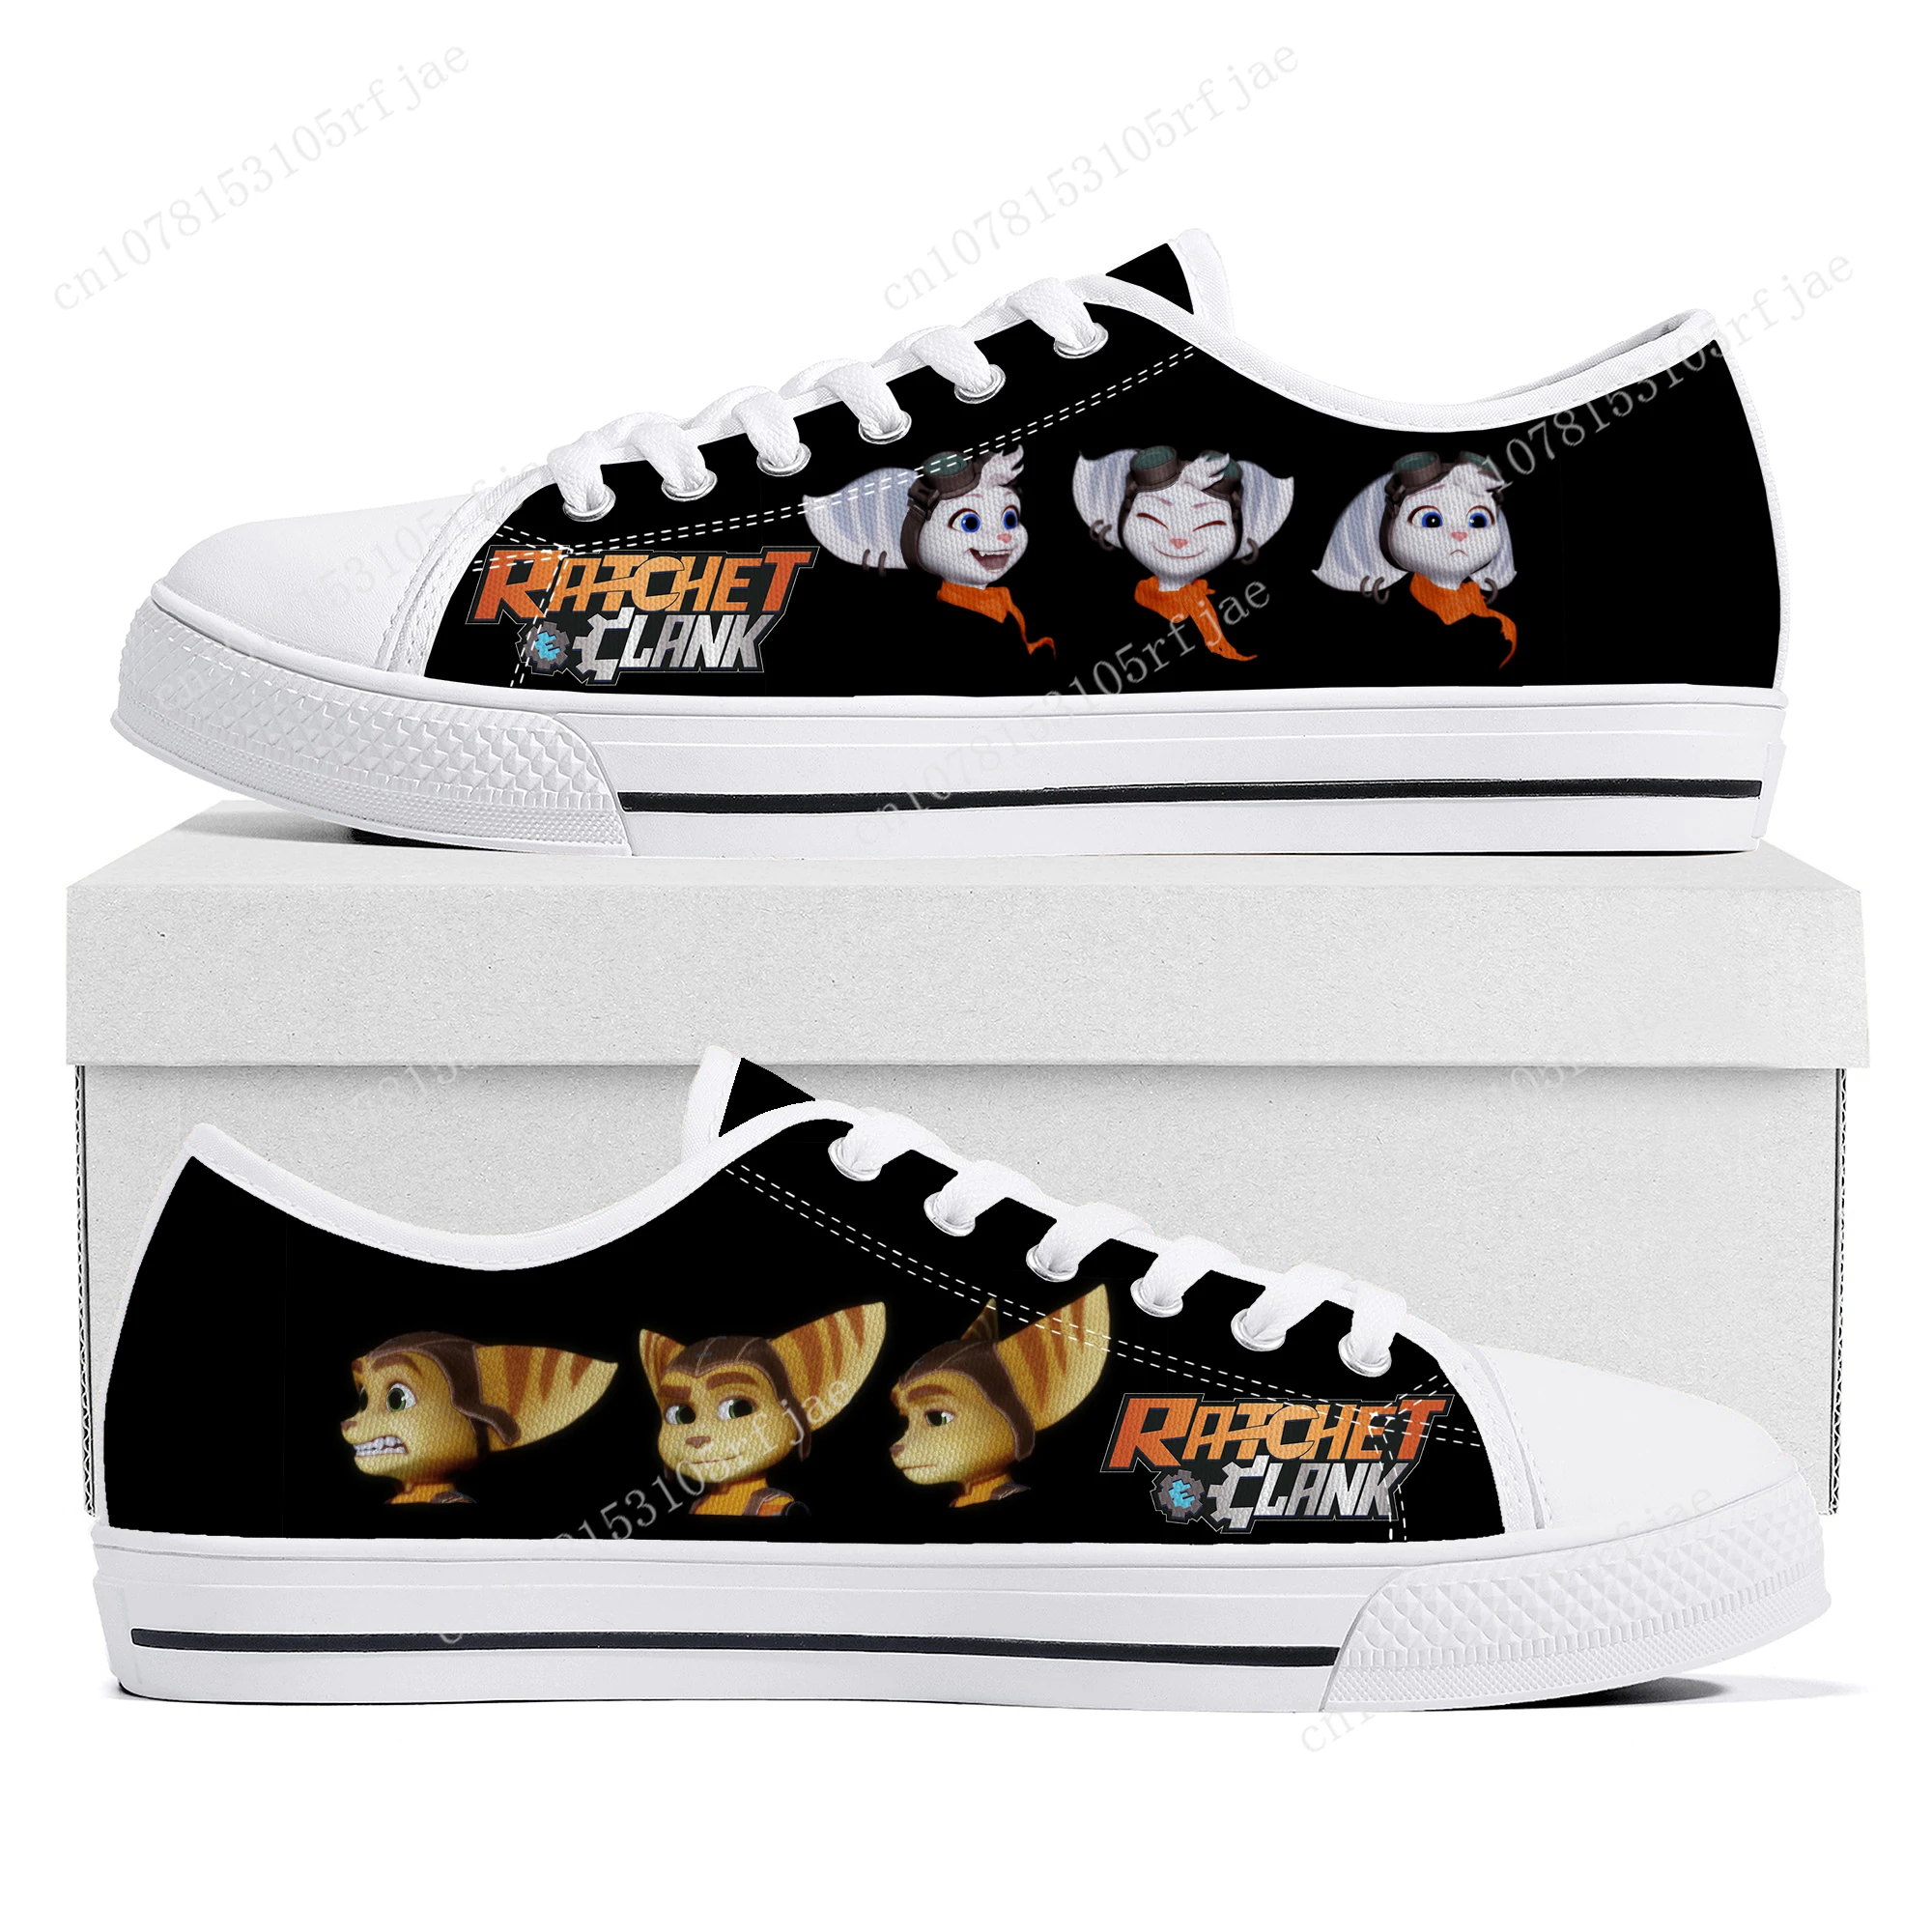 

Ratchet & Clank Rift Apart Low Top Sneakers Hot Cartoon Game Womens Mens High Quality Canvas Sneaker Couple Custom Built Shoes